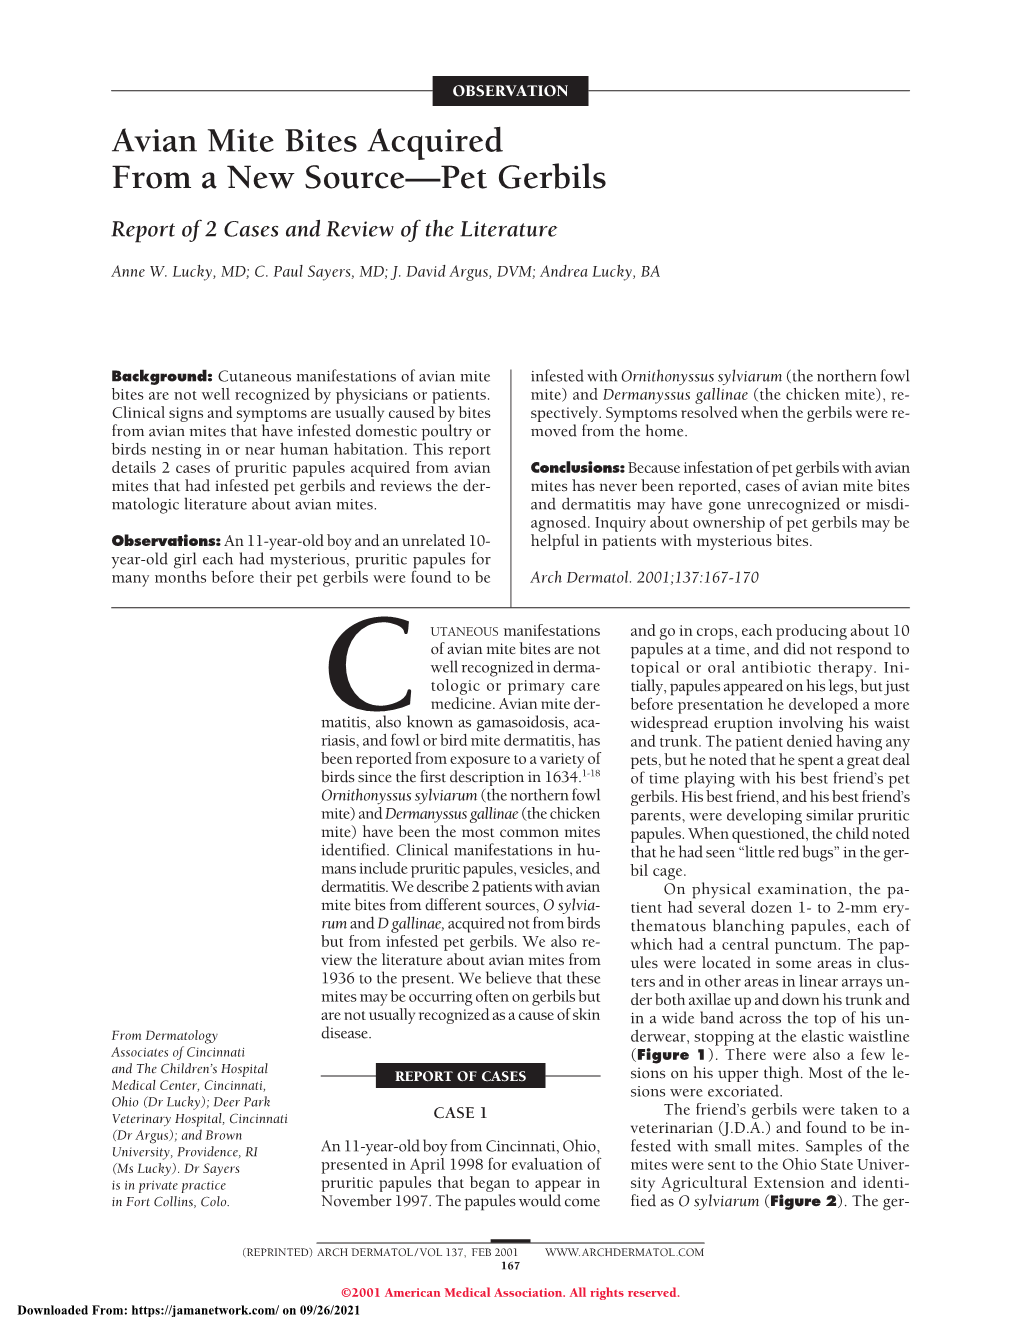 Avian Mite Bites Acquired from a New Source—Pet Gerbils Report of 2 Cases and Review of the Literature